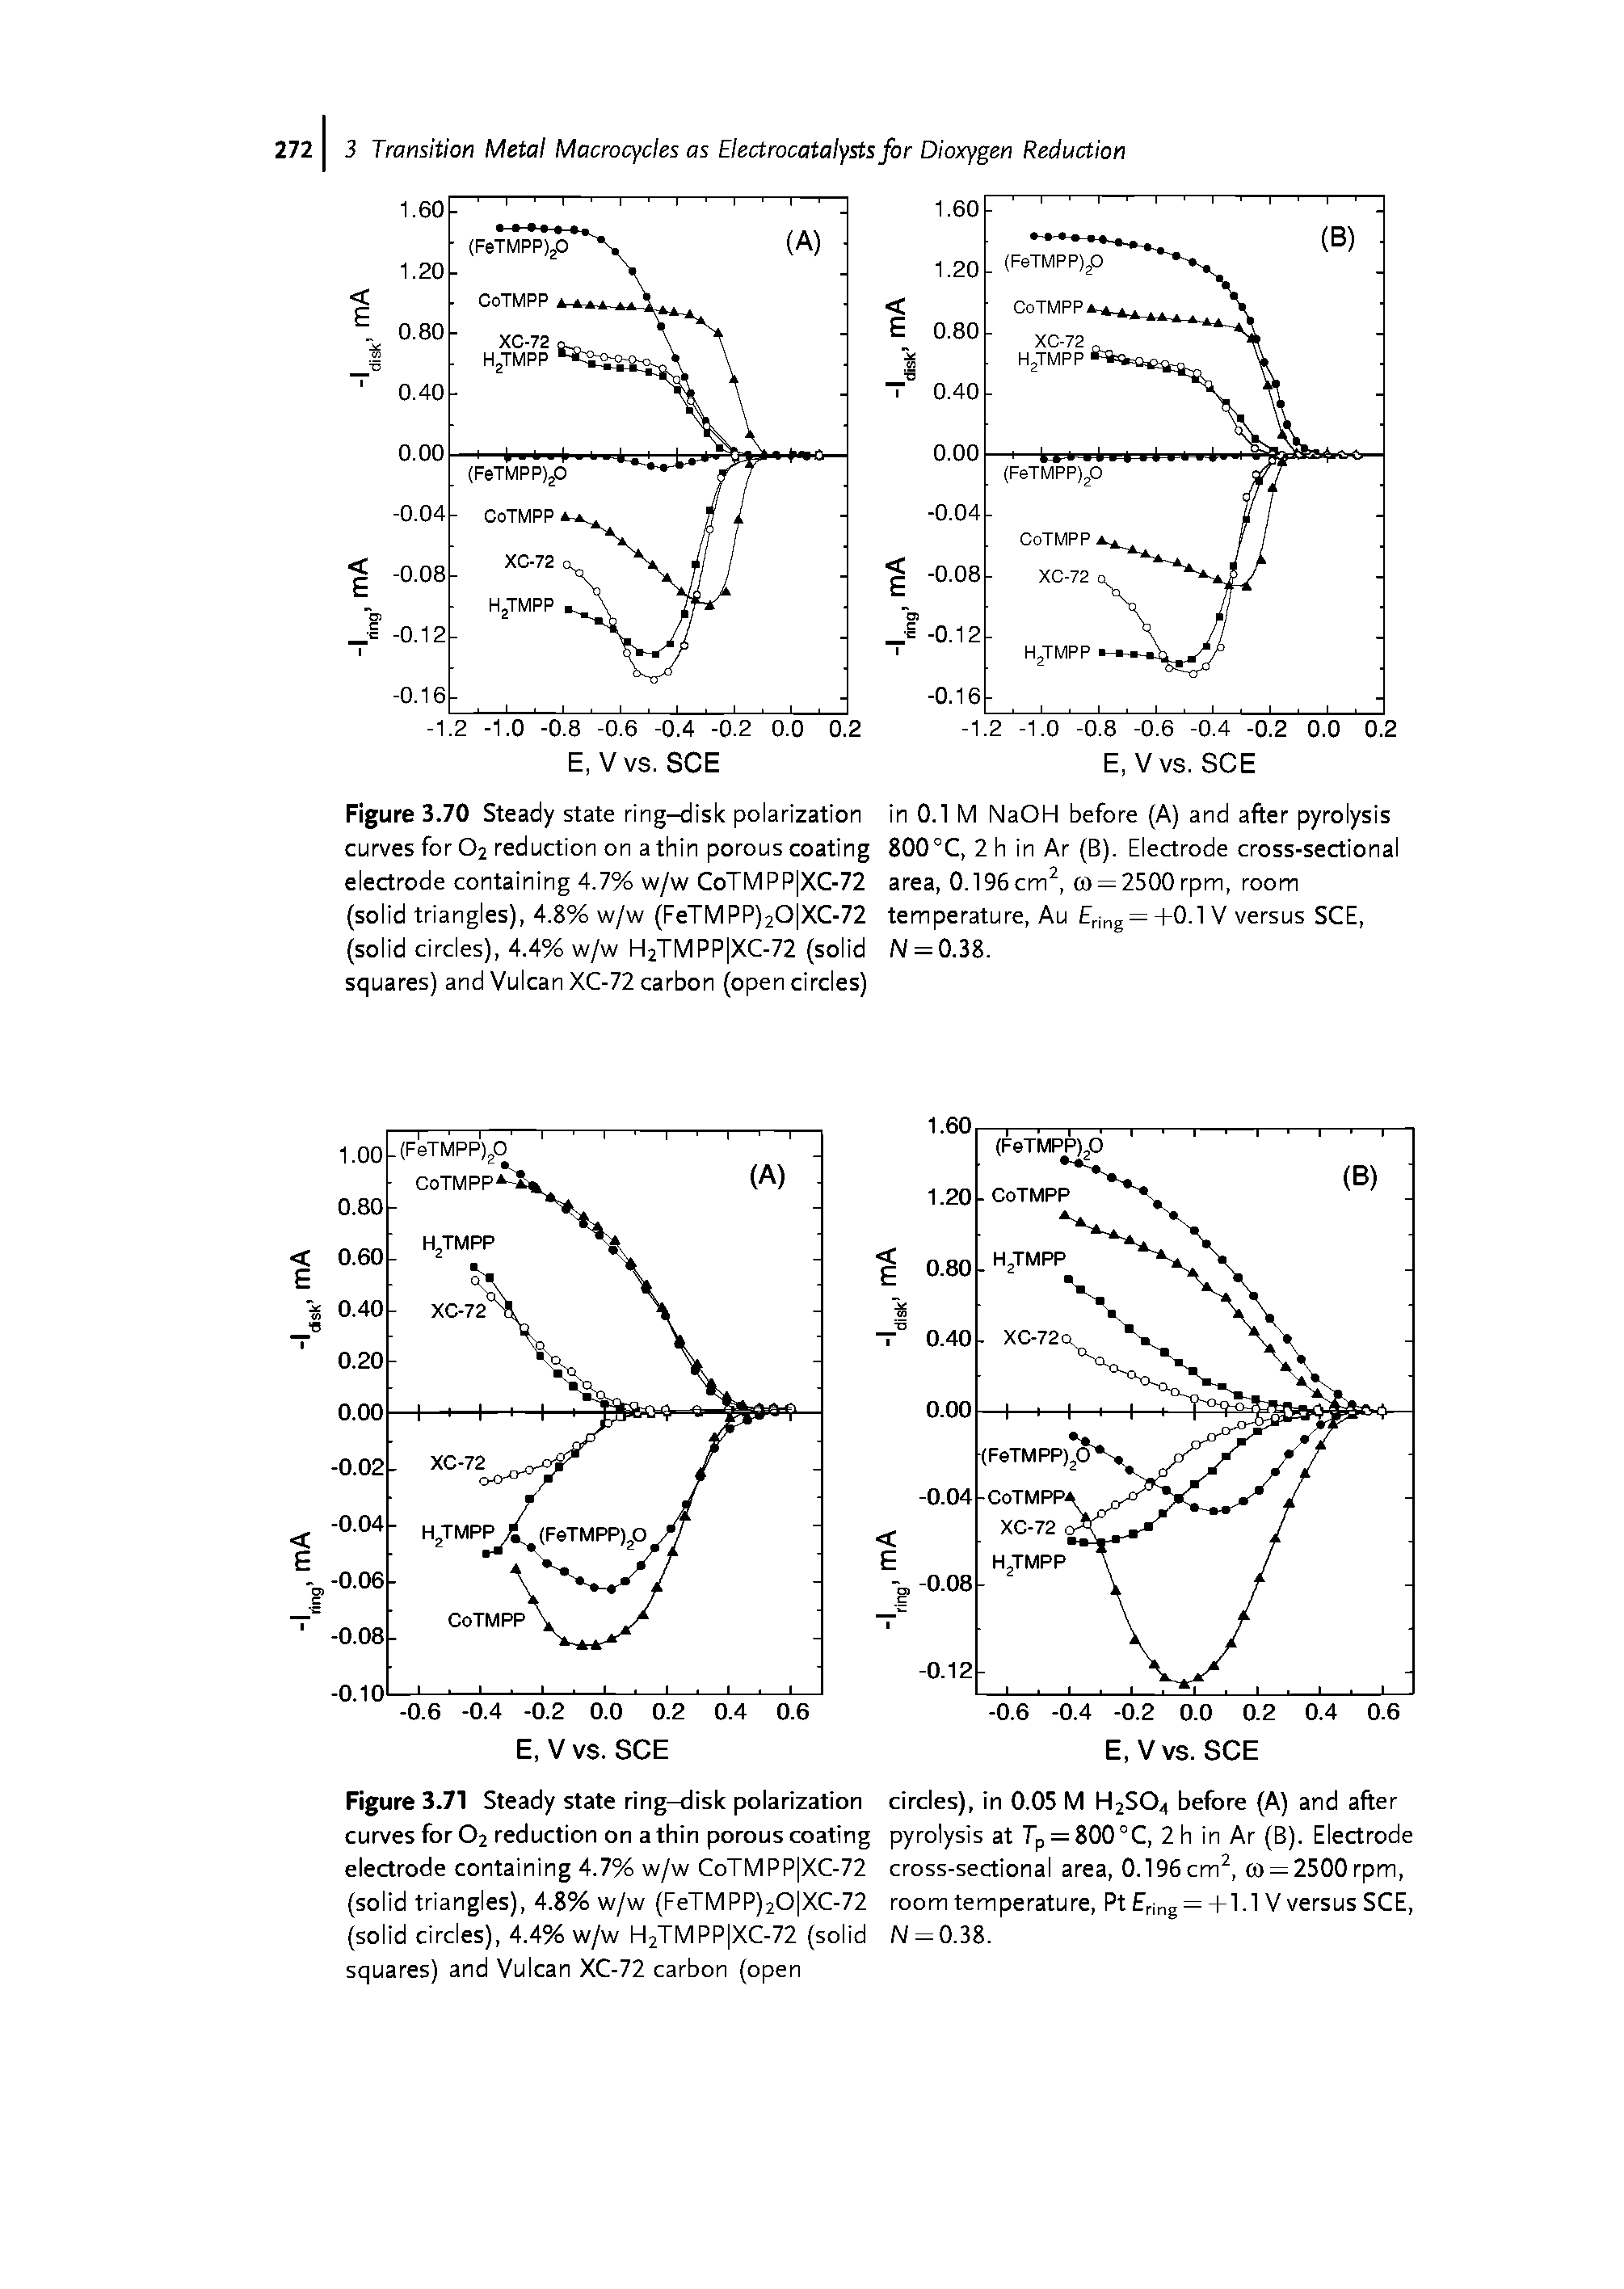 Figure 3.70 Steady state ring-disk polarization in 0.1 M NaOH before (A) and after pyrolysis curves for O2 reduction on a thin porous coating 800 °C, 2 h in Ar (B). Electrode cross-sectional electrode containing 4.7% w/w CoTMPP XC-72 area, 0.196cm2, co = 2500rpm, room (solid triangles), 4.8% w/w (FeTMPP)20 XC-72 temperature, Au Ering = +0.1 V versus SCE, (solid circles), 4.4% w/w H2TMPP XC-72 (solid N = 0.38. squares) and Vulcan XC-72 carbon (open circles)...